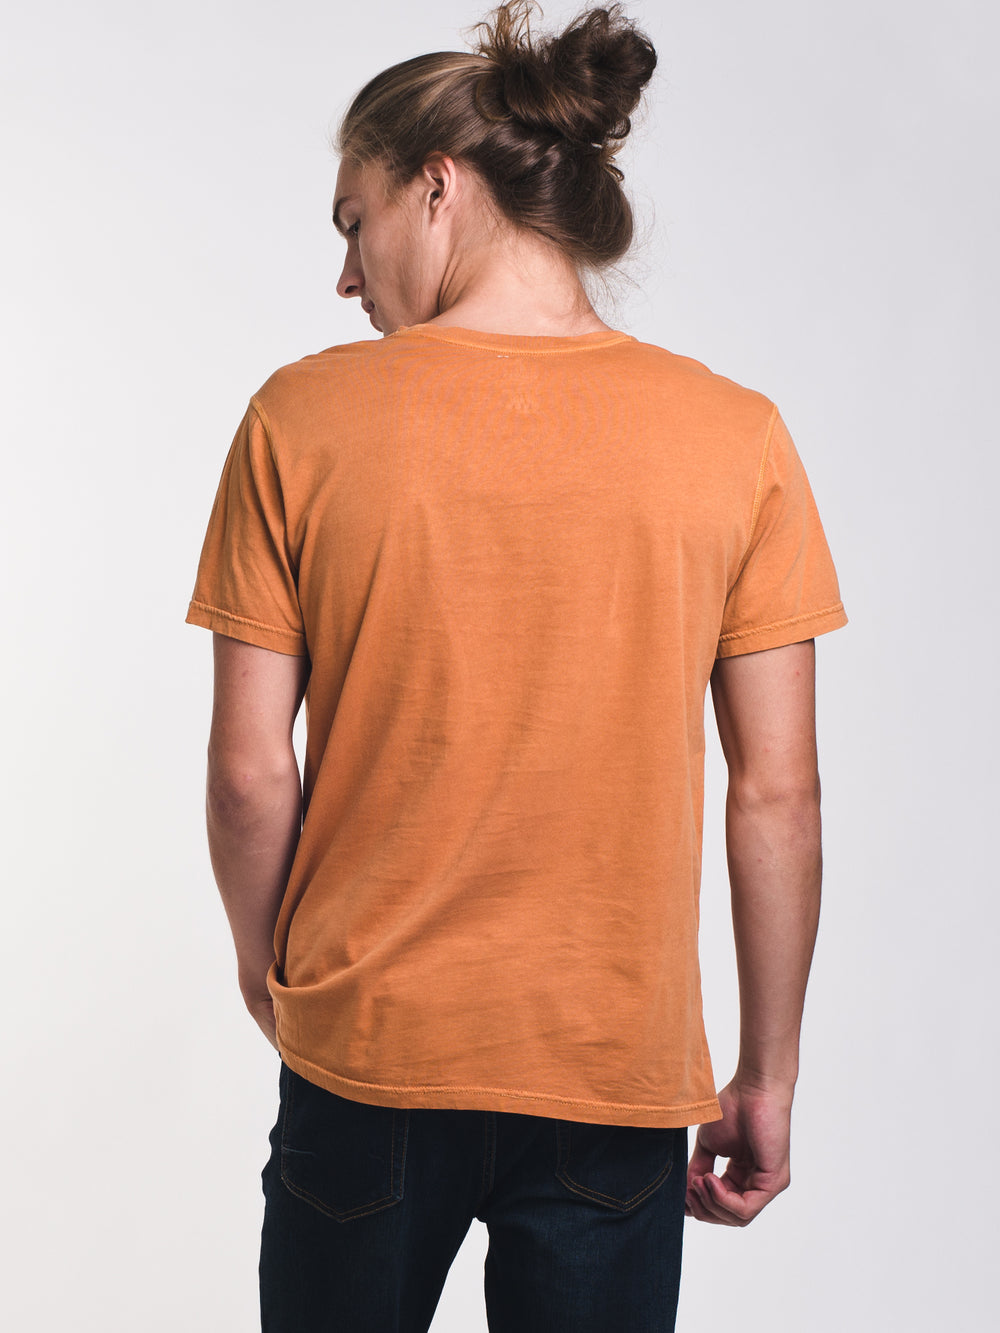 MENS VICTOR GARMENT CREW - AMBER - CLEARANCE